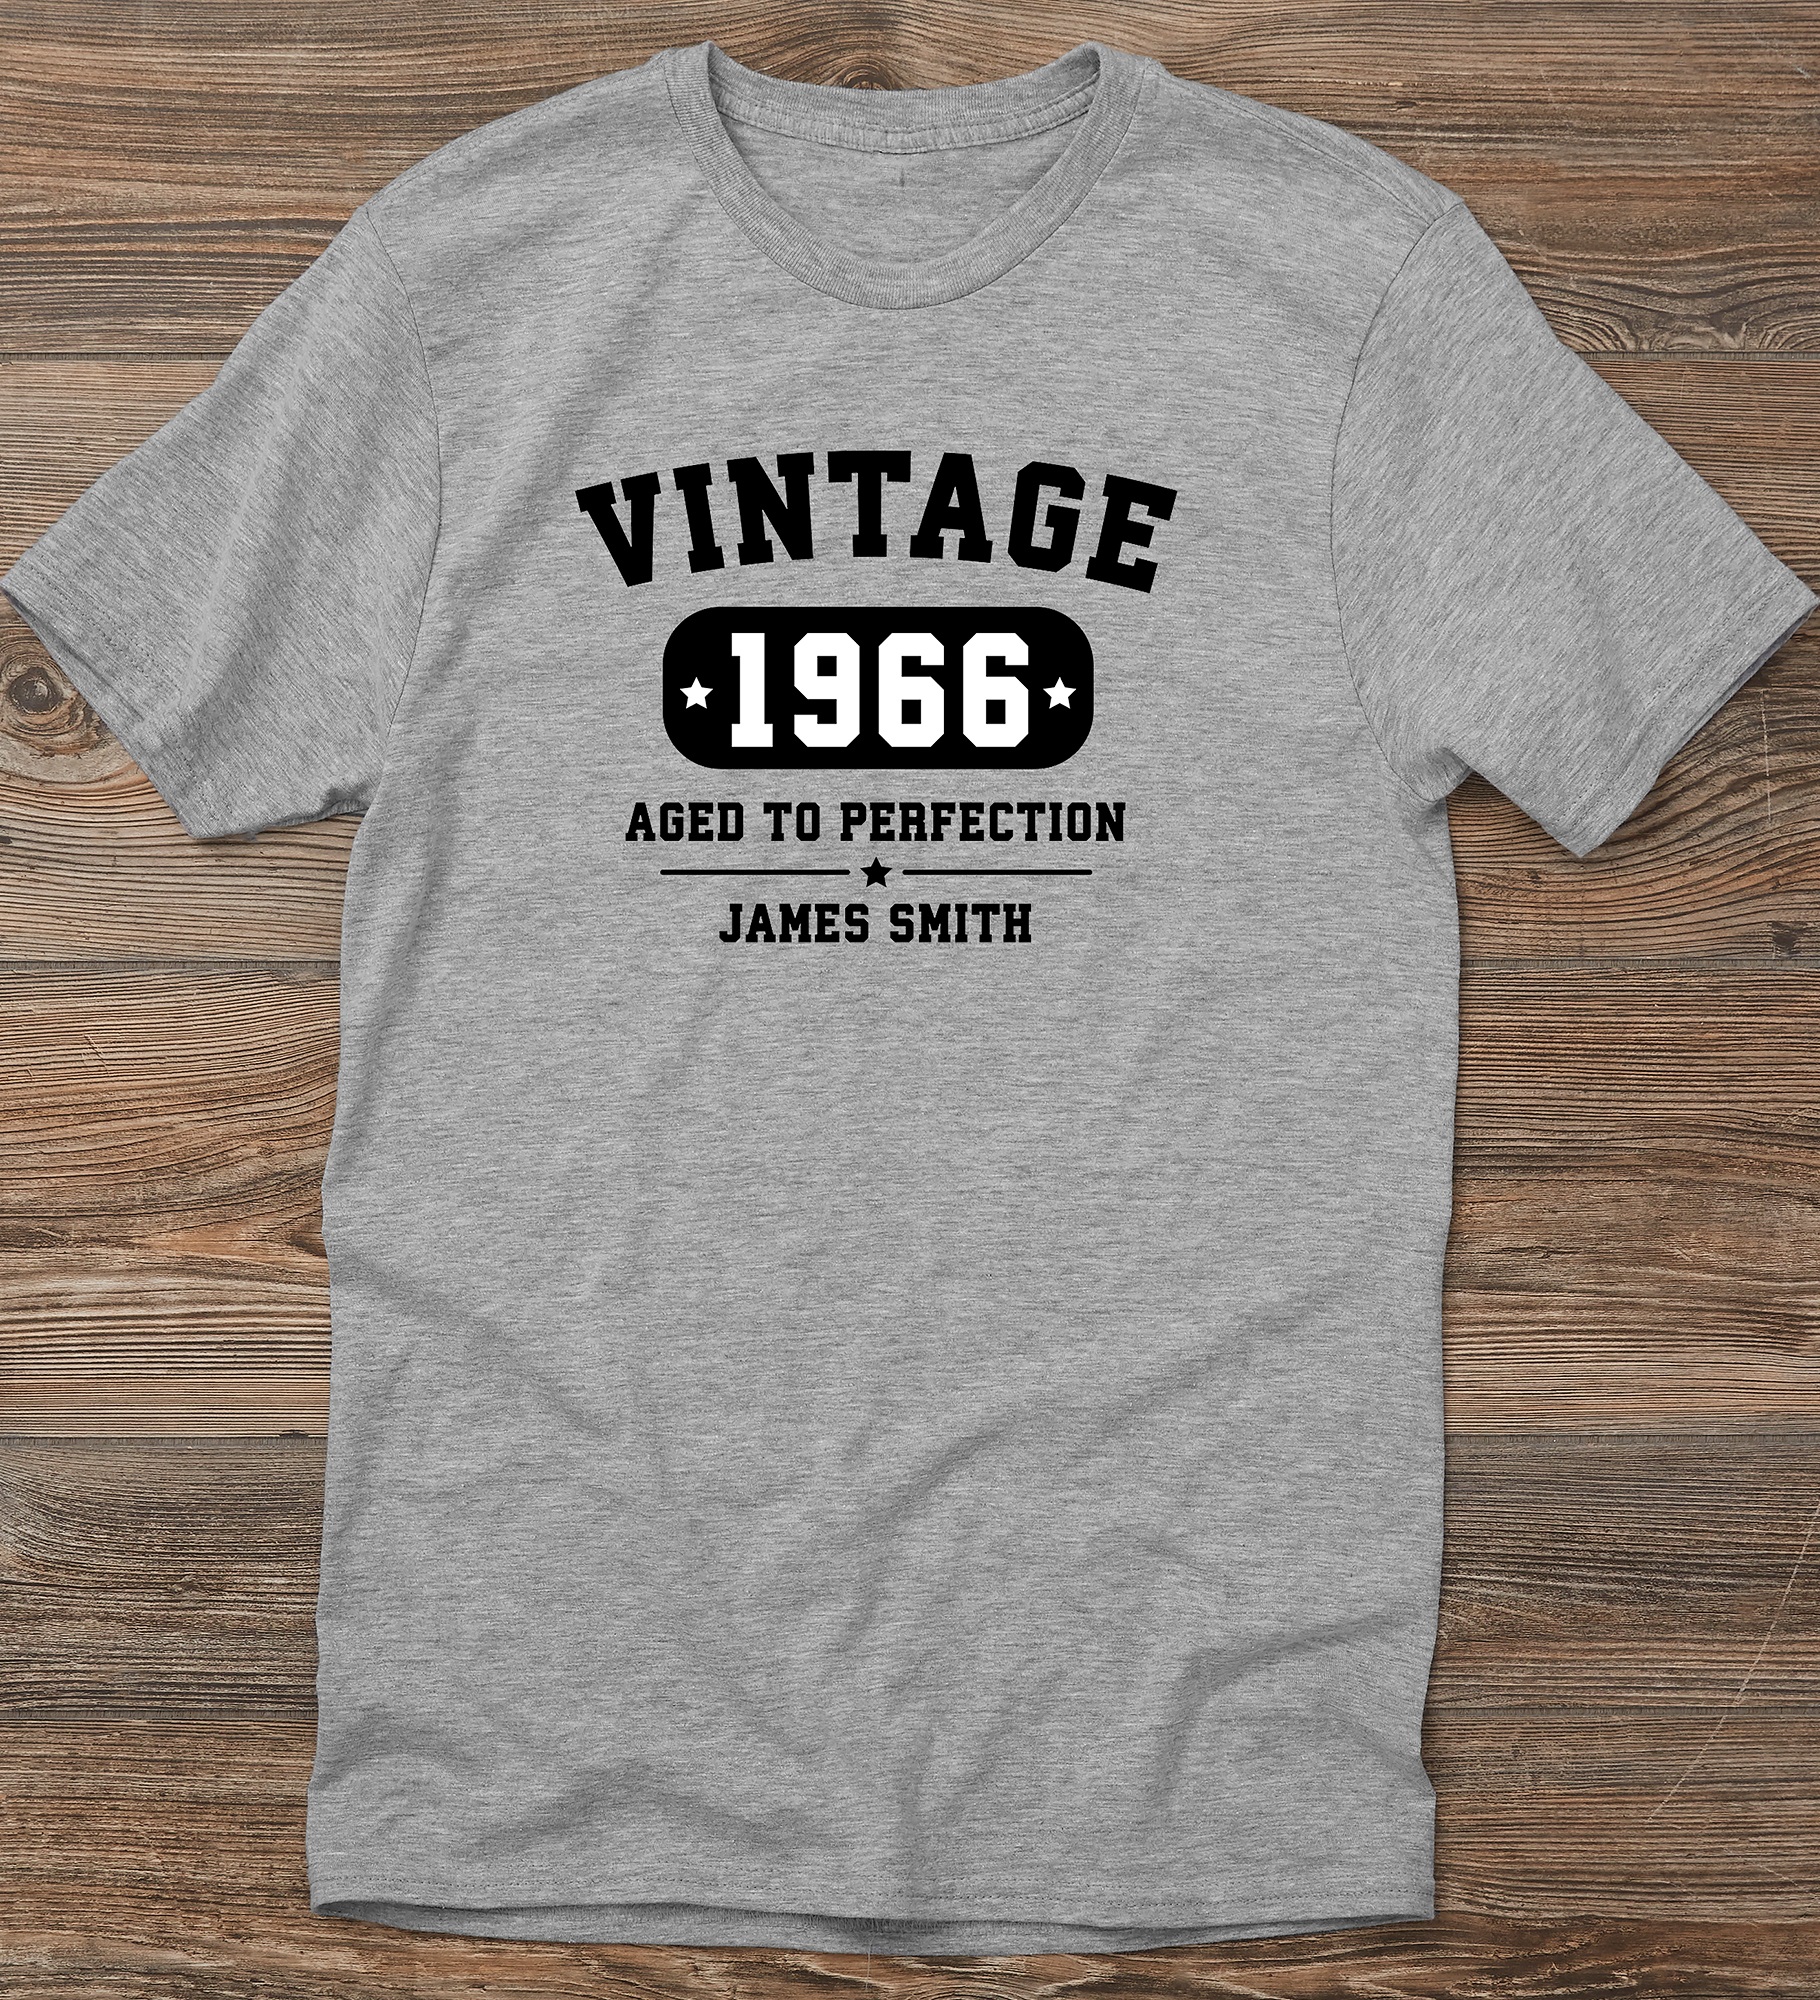 Vintage Birthday Personalized Adult Shirts